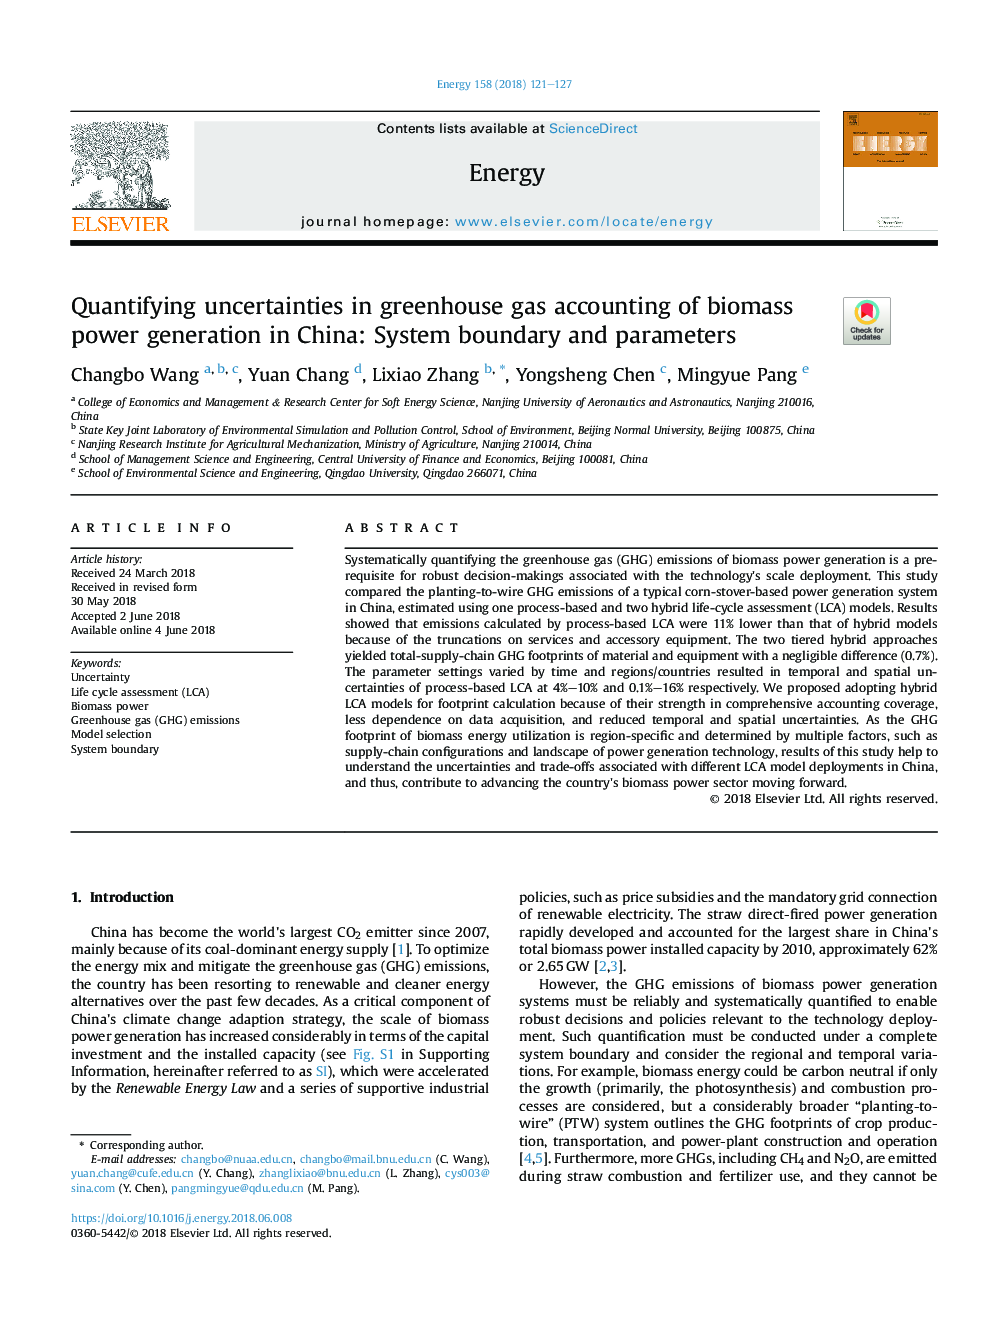 Quantifying uncertainties in greenhouse gas accounting of biomass power generation in China: System boundary and parameters